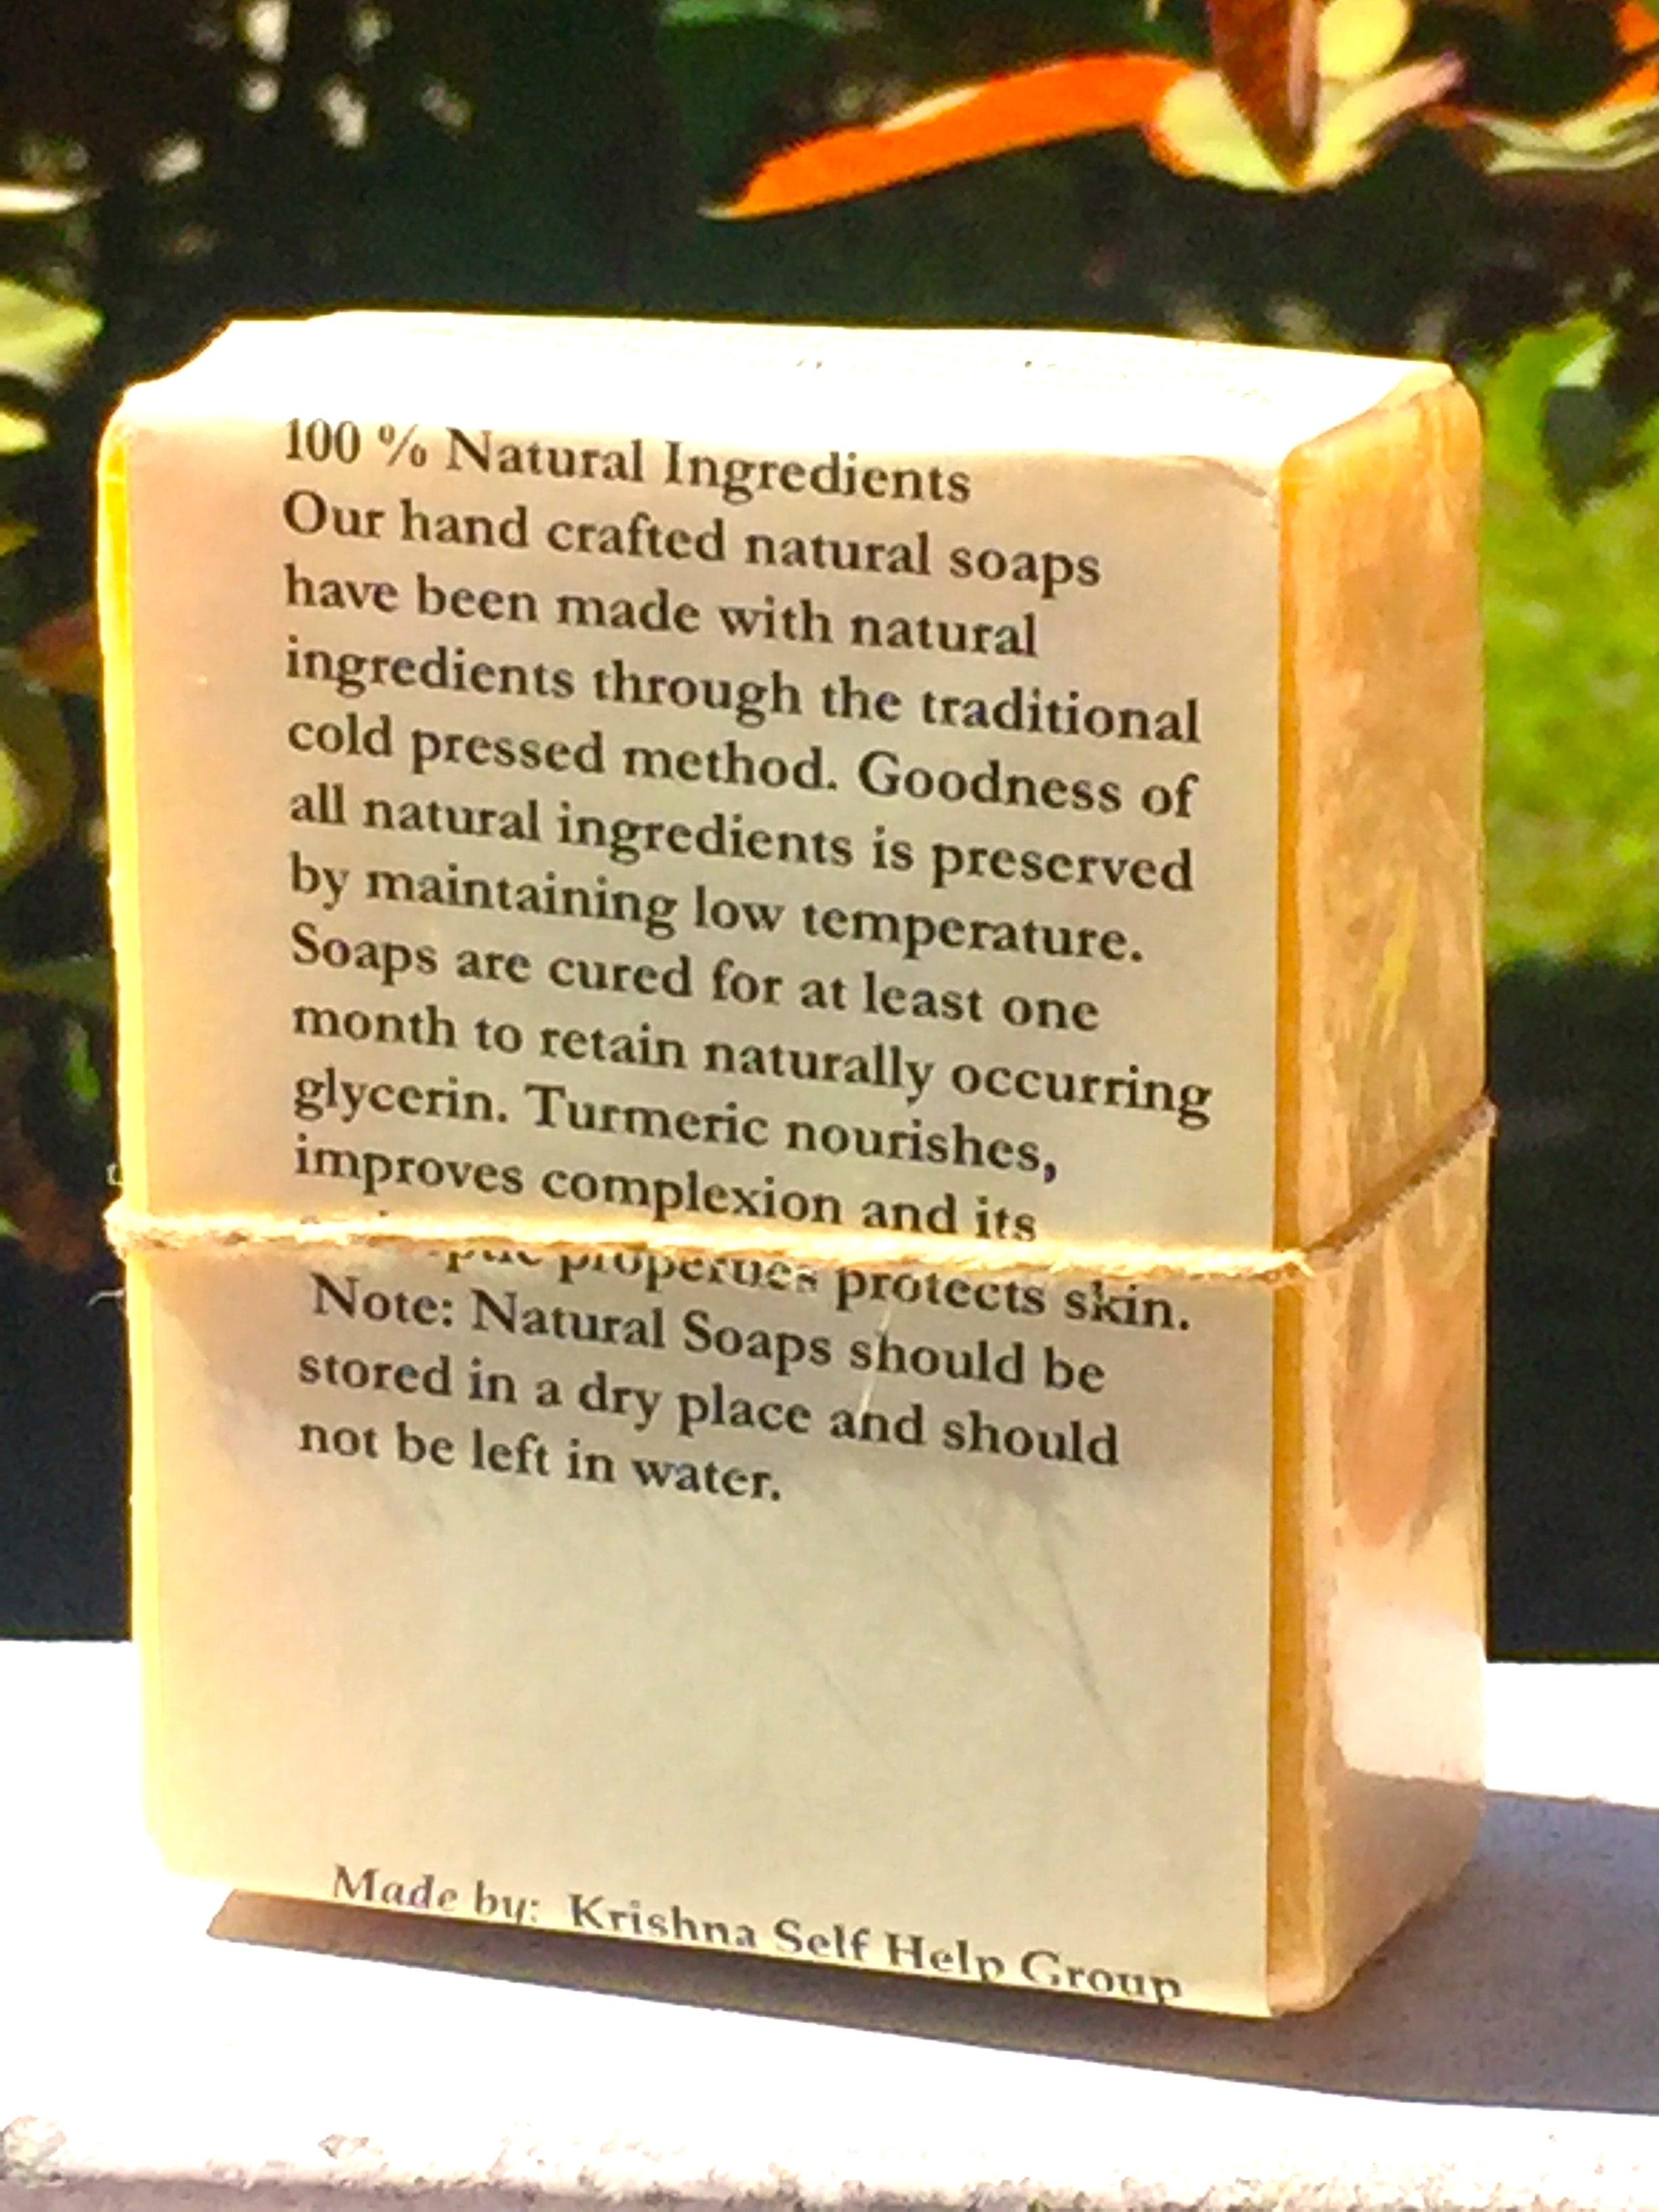 100% Natural cold pressed soaps